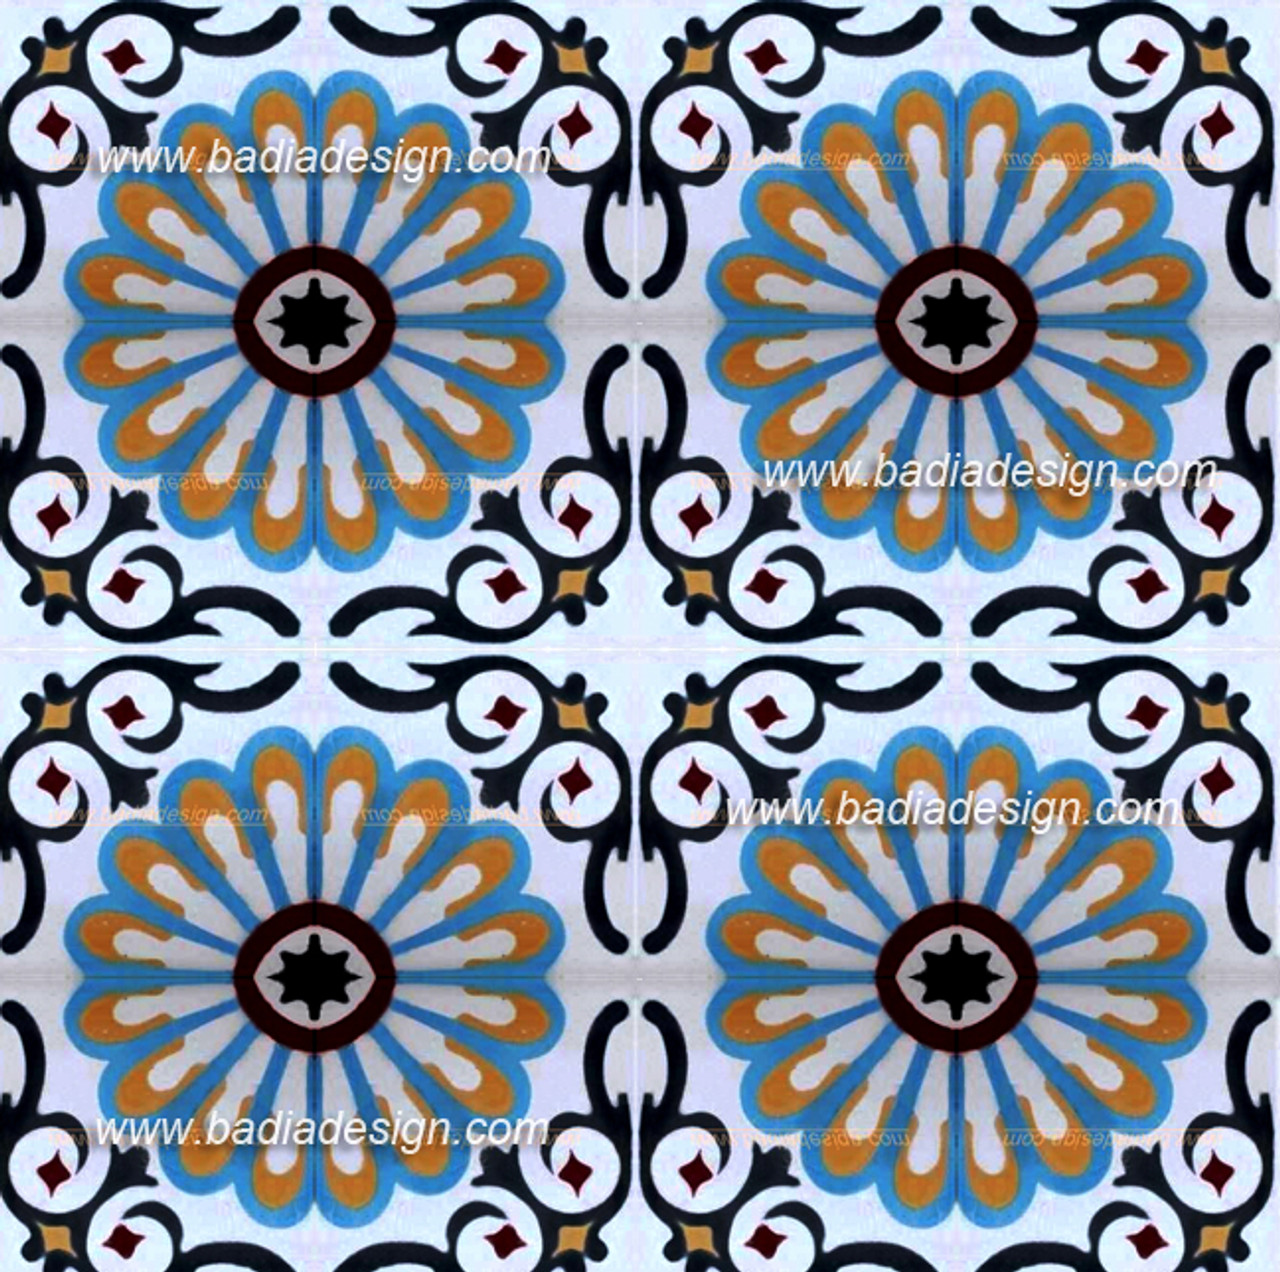 This pattern is created by the combination of many CT009 tile design.